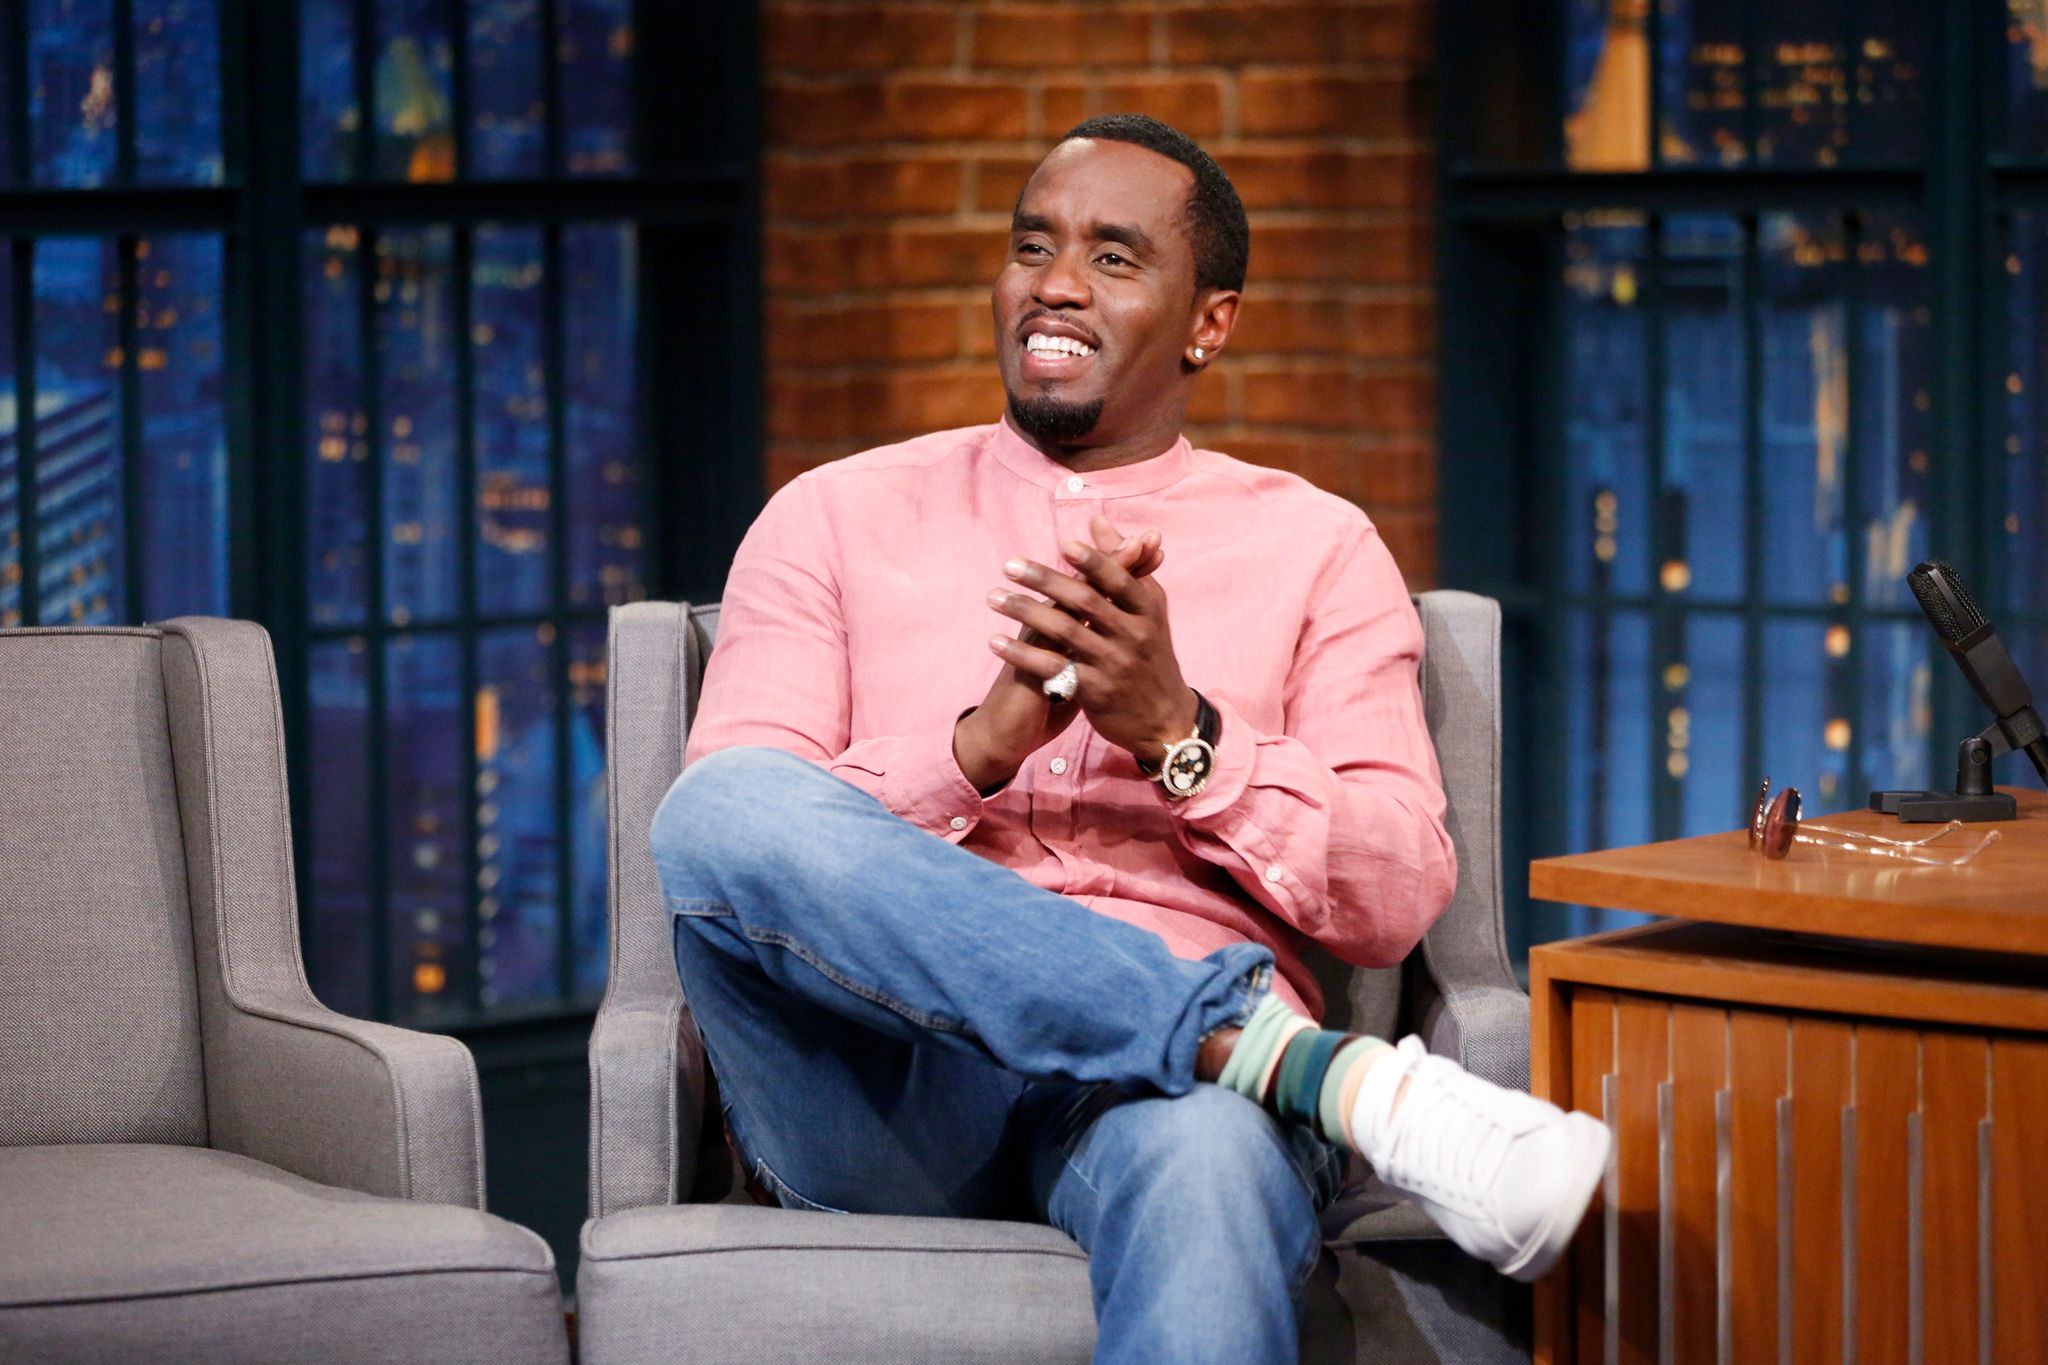 Diddy at the "Late Night with Seth Meyers" show on June 28, 2017. | Photo: Getty Images